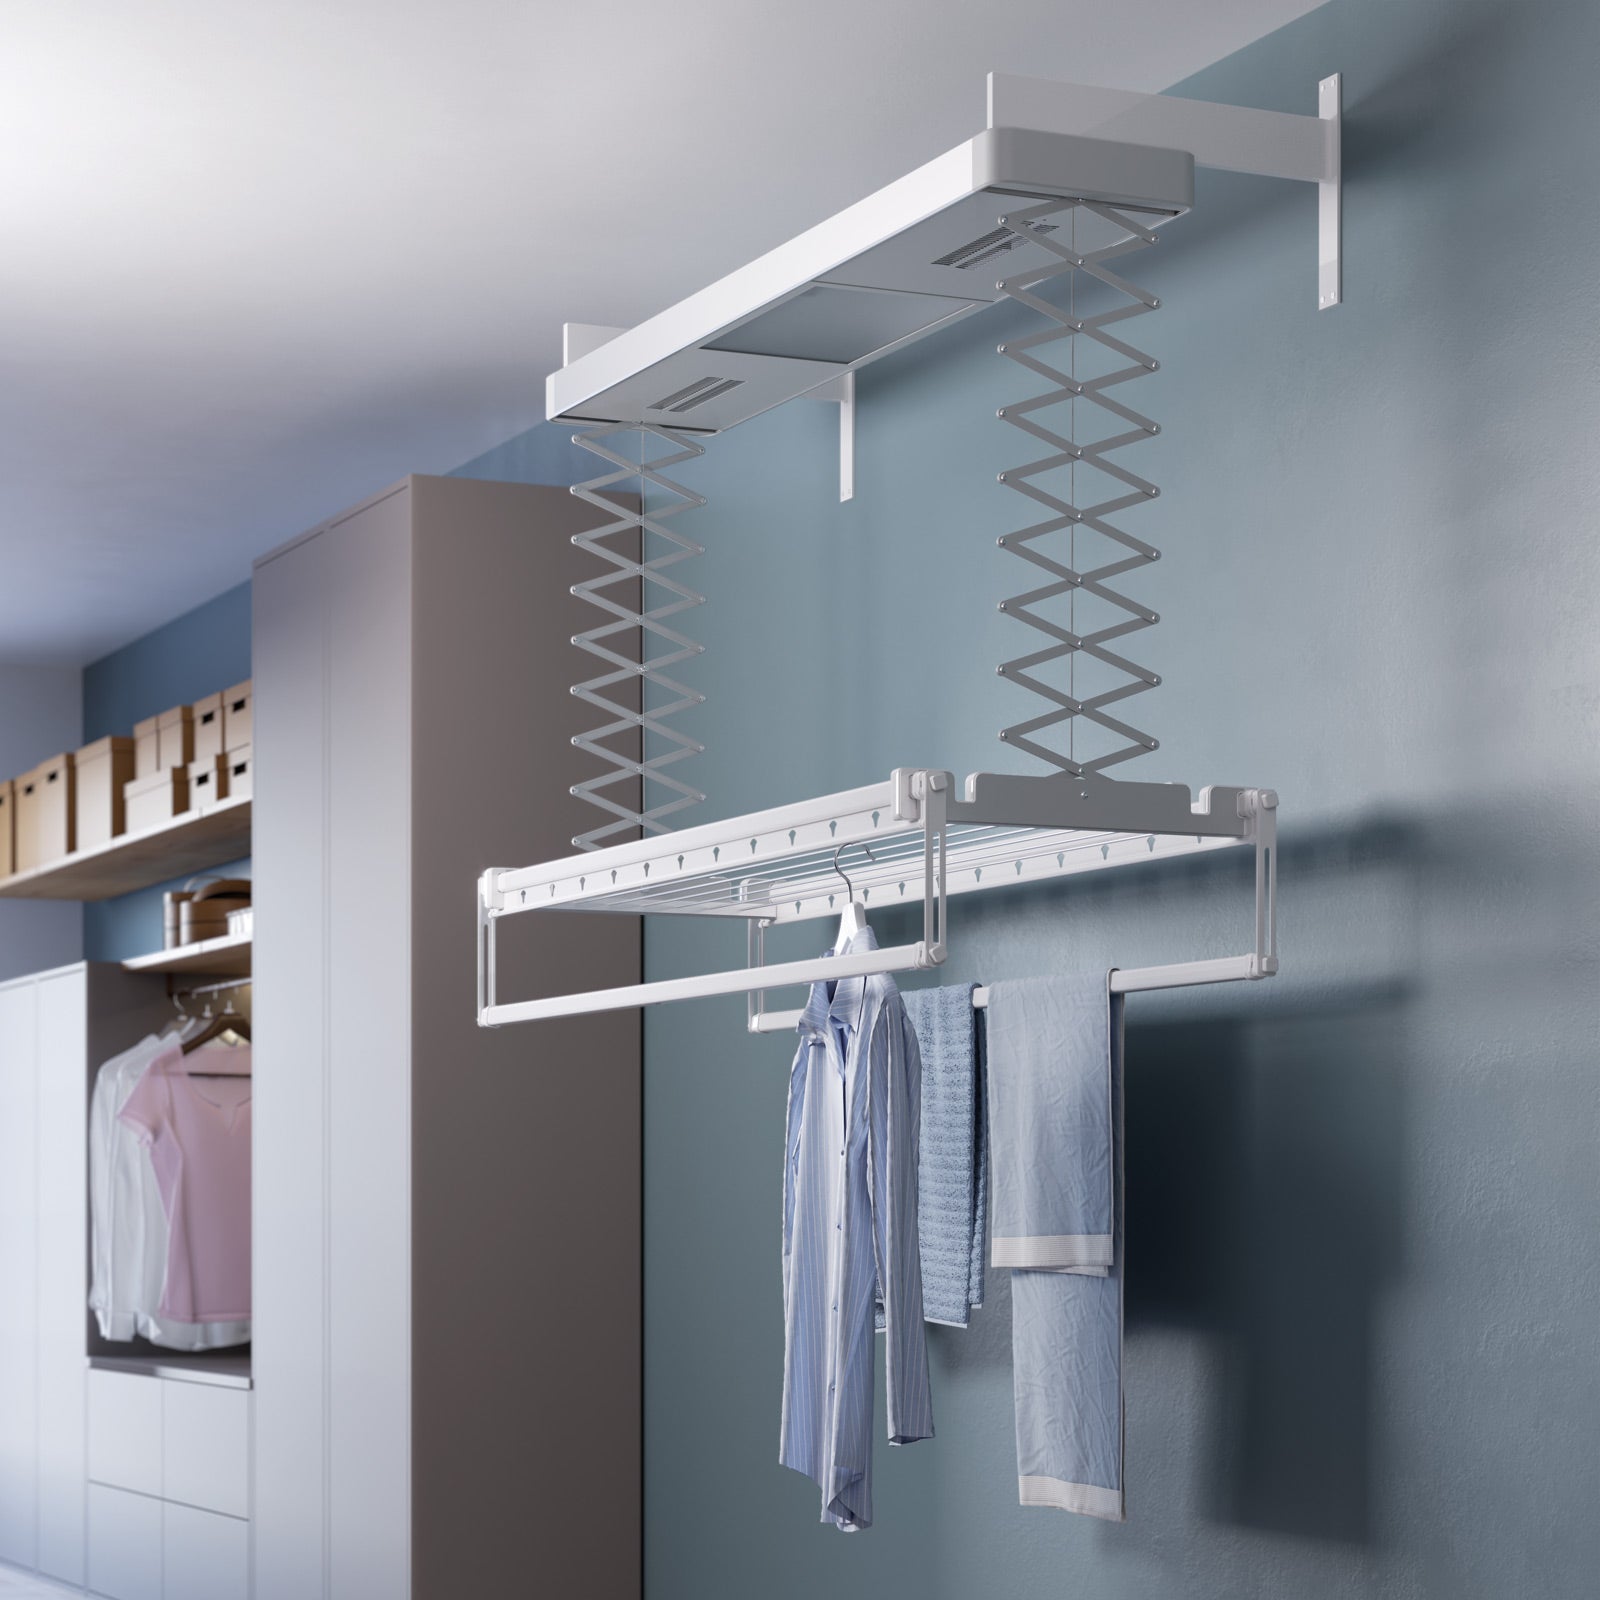 Wall / Ceiling Mounted Clothes Drying Rack, Clothes Airer, Hanging Laundry  Drying Rack, Clothes Drying Place, Laundry Room Drying Rack -  Hong Kong